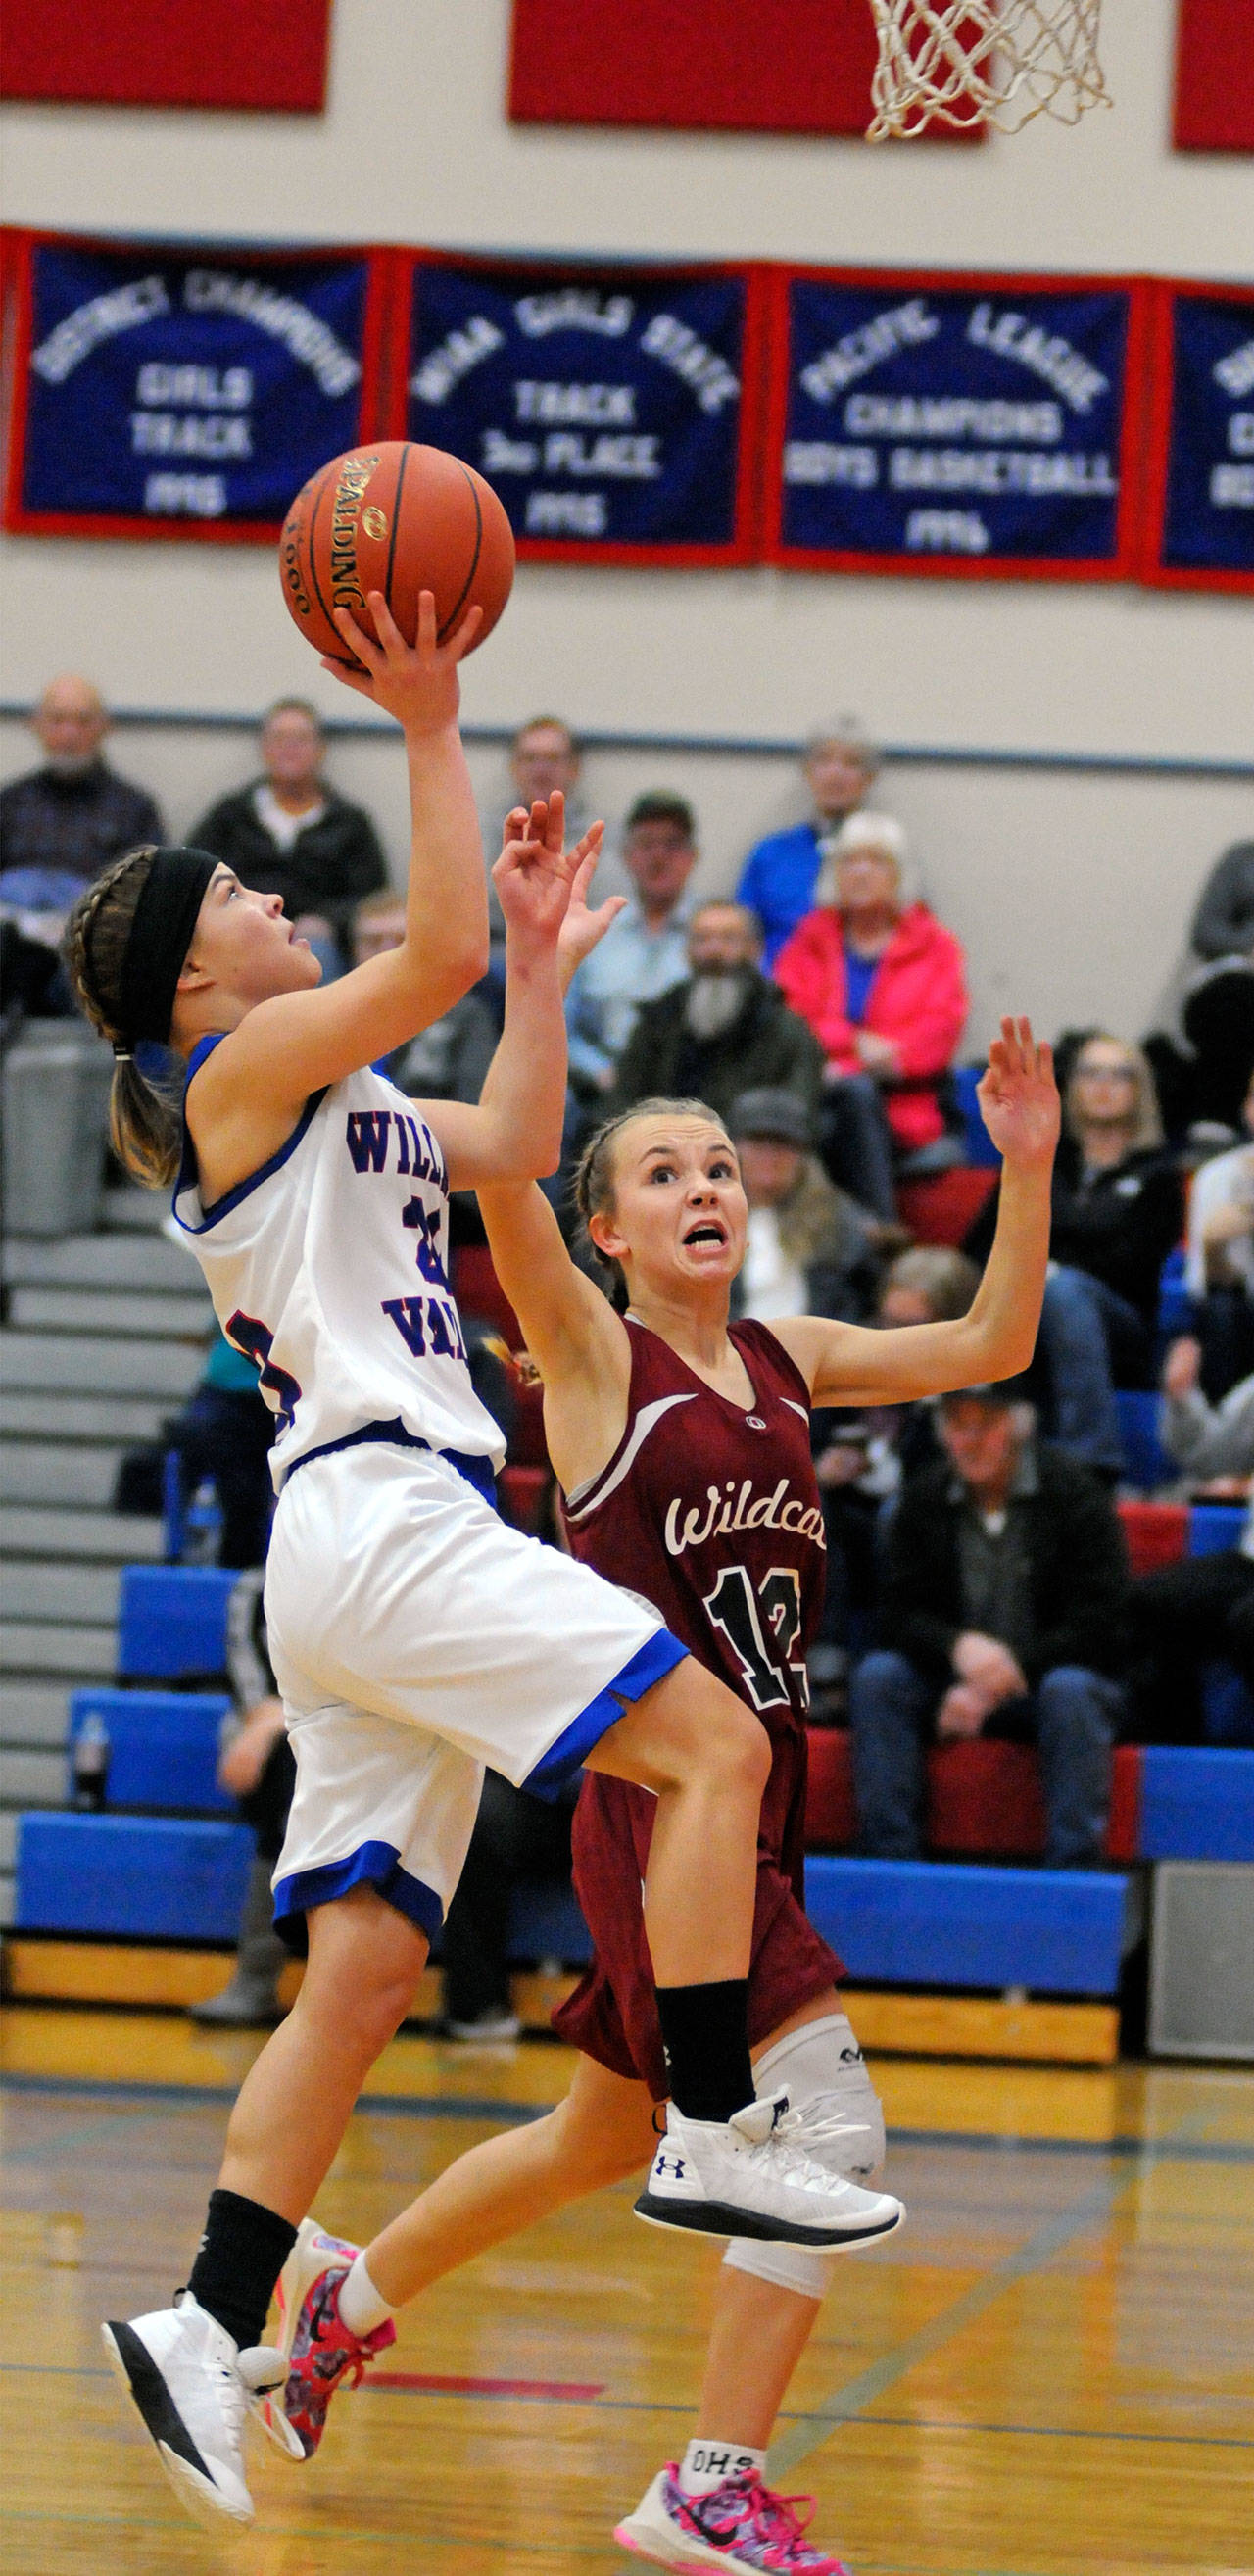 Willapa Valley’s Brooke Friese rises for a shot against Ocosta’s Kjristin Hopfer during the Wildcats’ 43-40 win on Tuesday. (Ryan Sparks | Grays Harbor News Group)